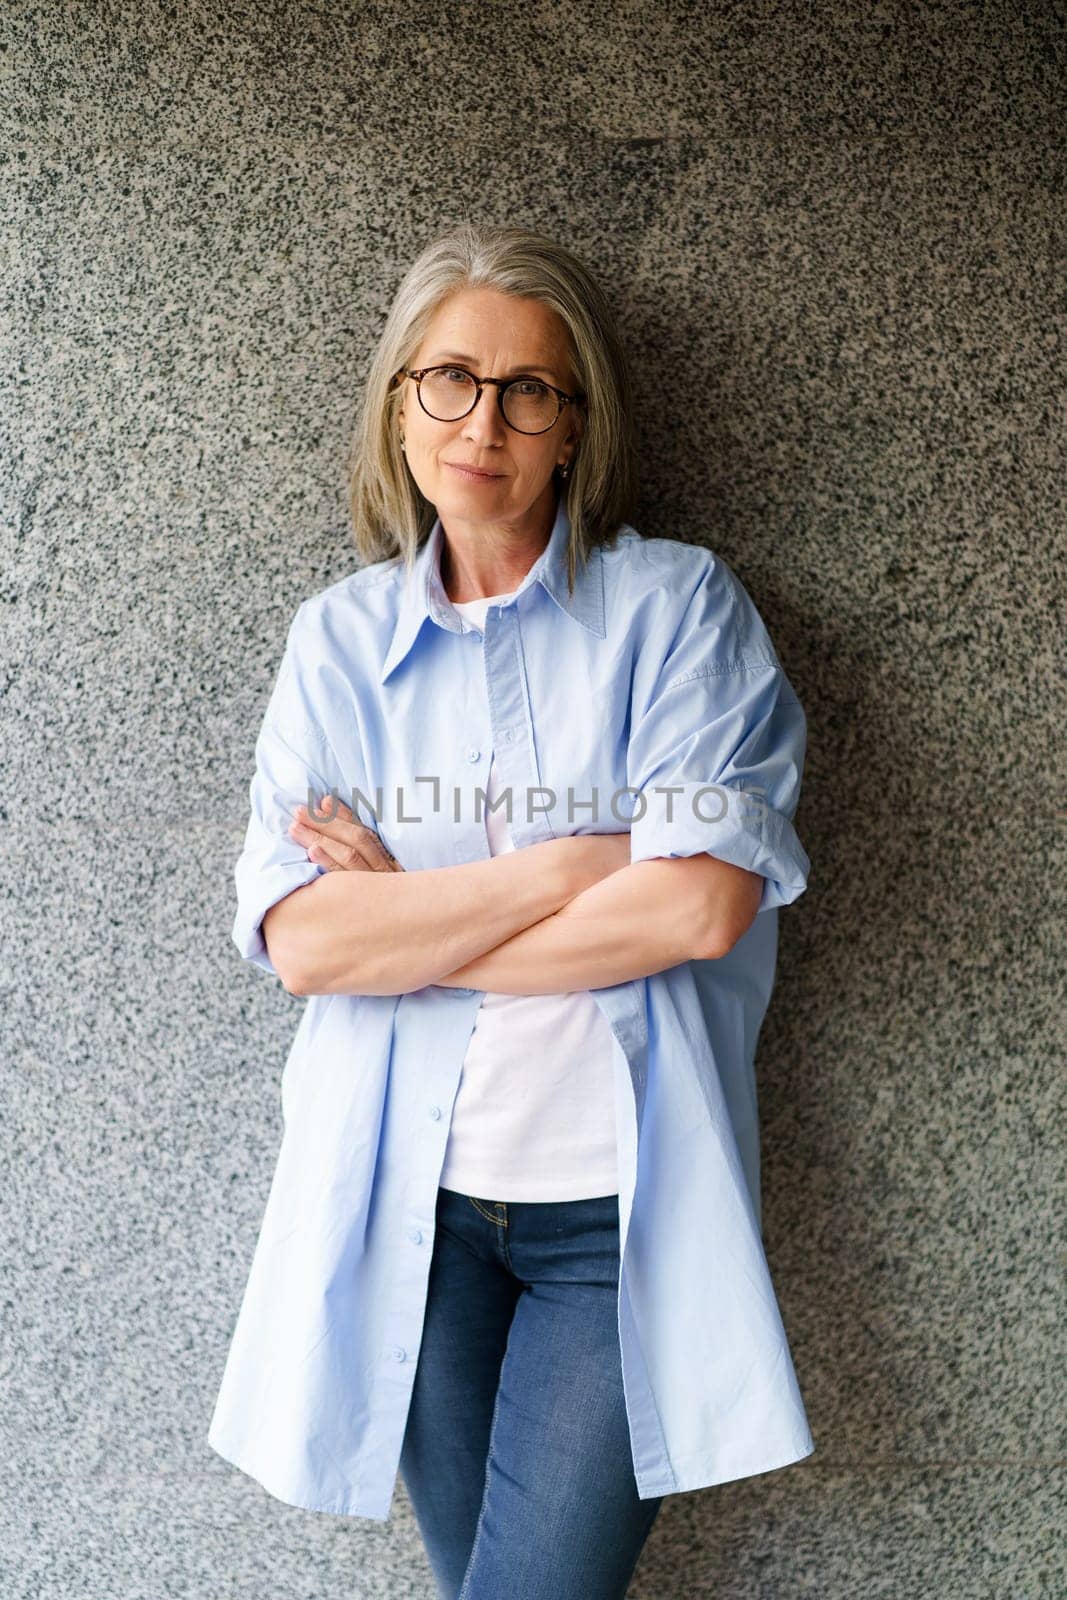 Confident and stylish senior woman with a seductive look standing near a wall in an urban environment, exuding independence and sophistication. High quality photo